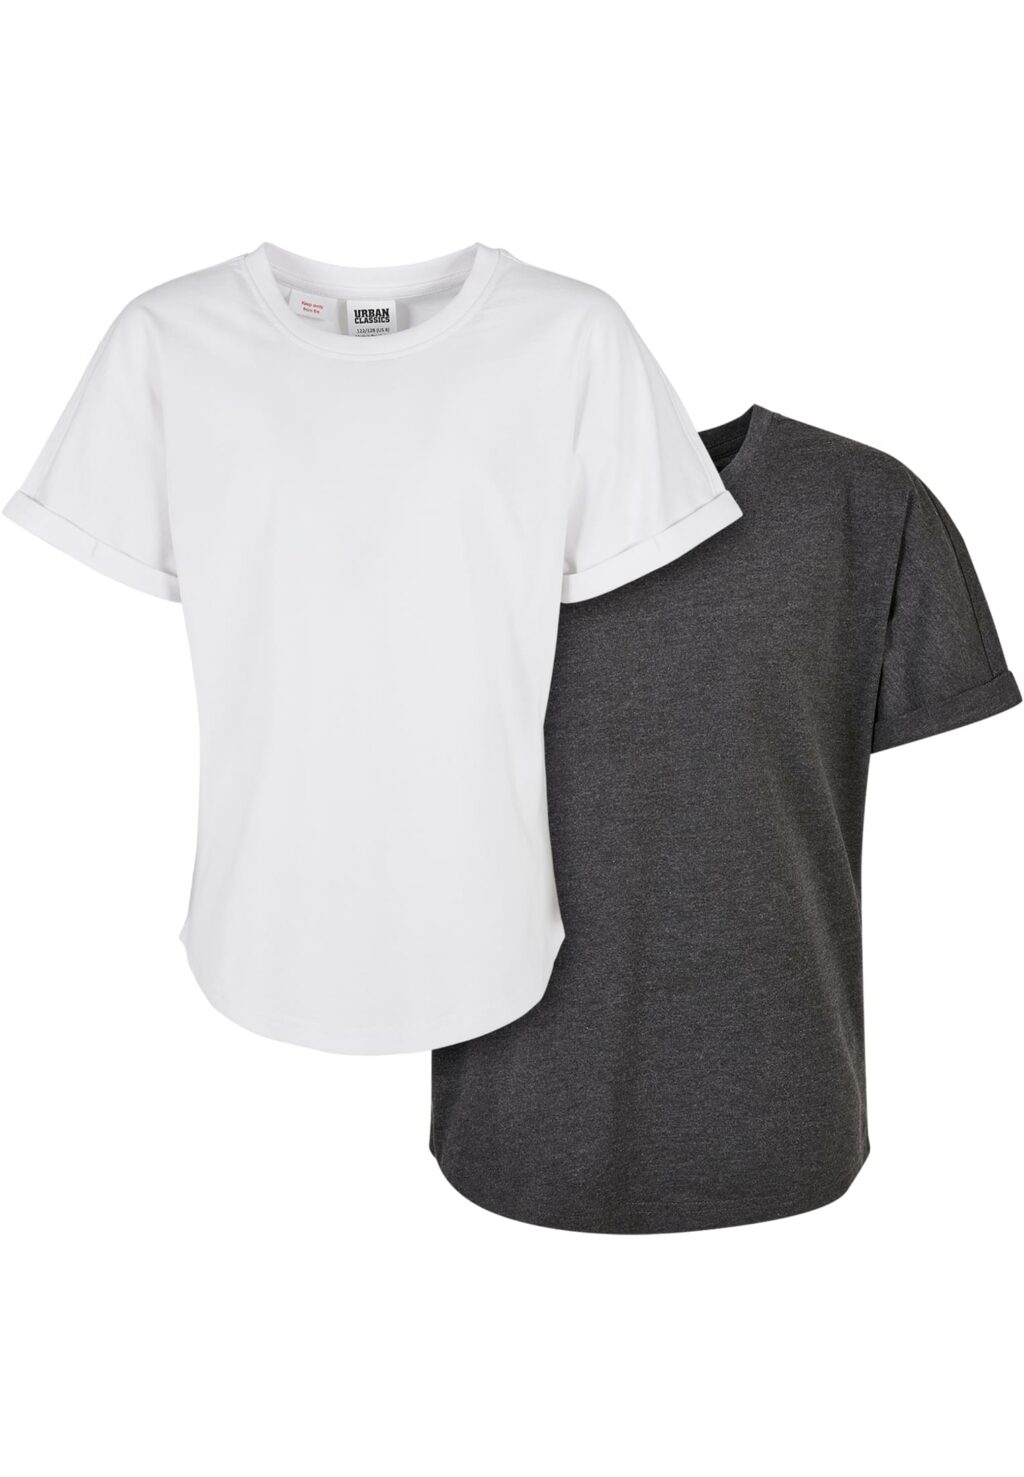 Boys Long Shaped Turnup Tee 2-Pack charcoal+white UCK1561A